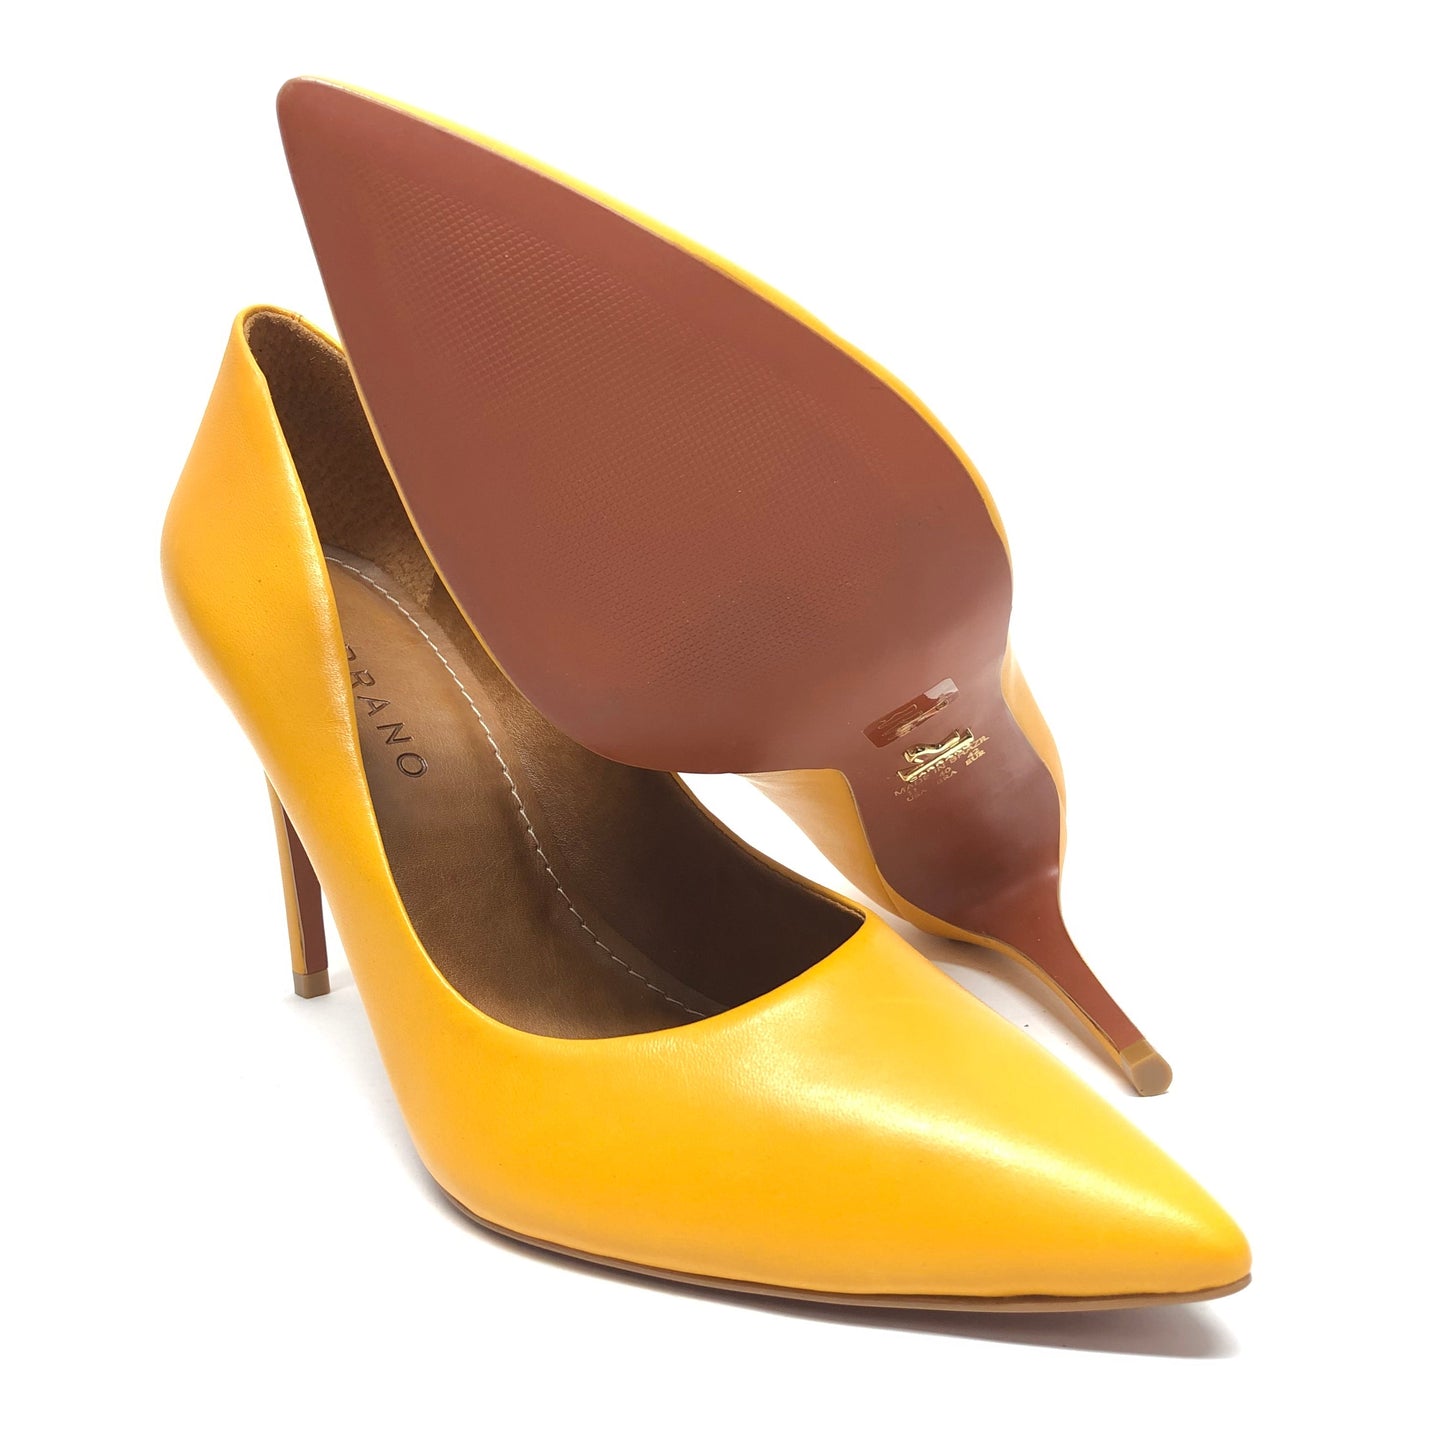 Yellow Shoes Heels Stiletto Cmb, Size 11